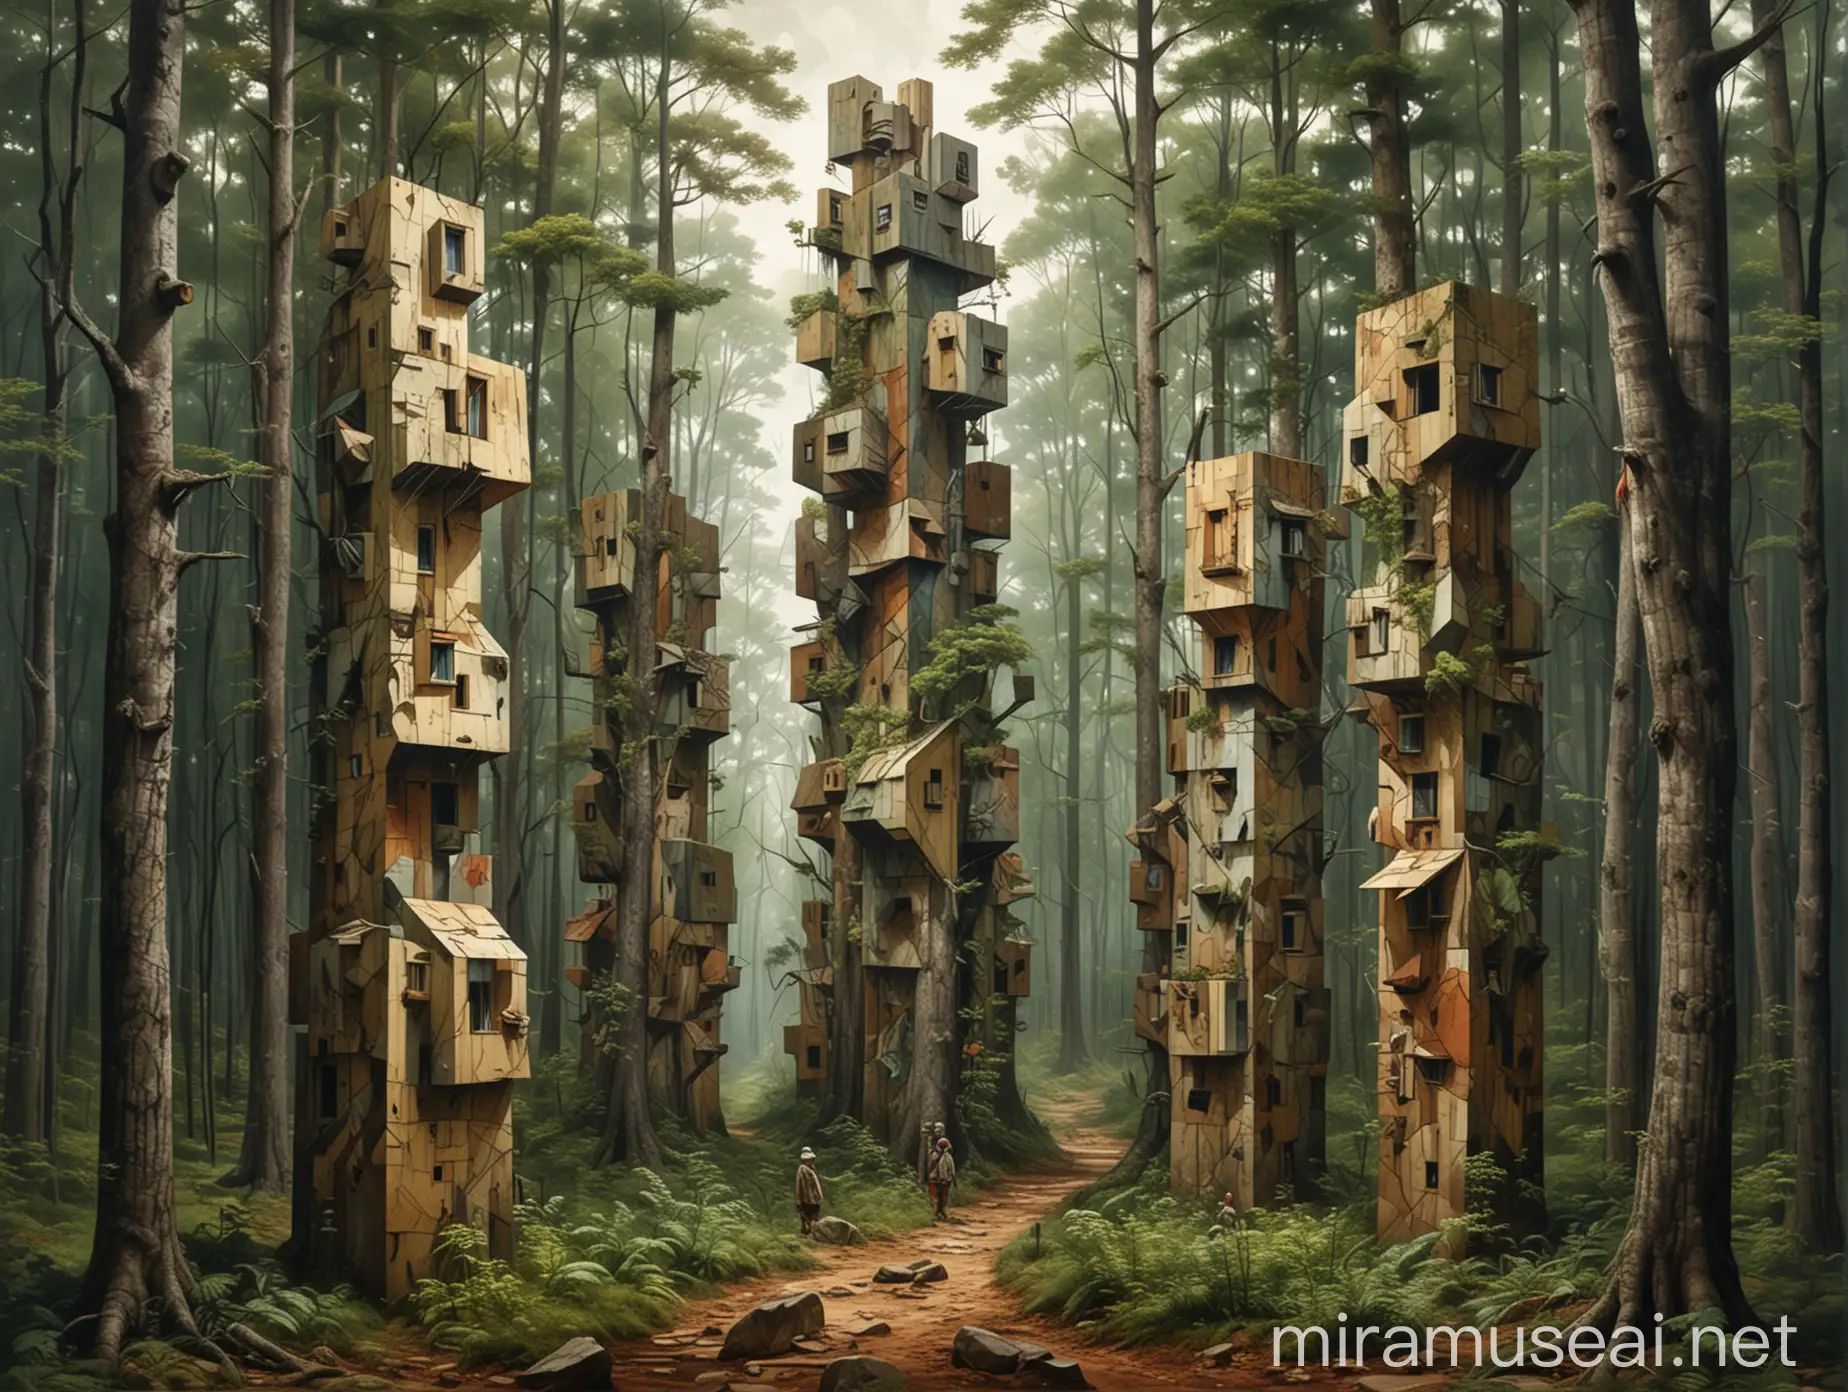 Cubism of wild people and towers that occupy the forest